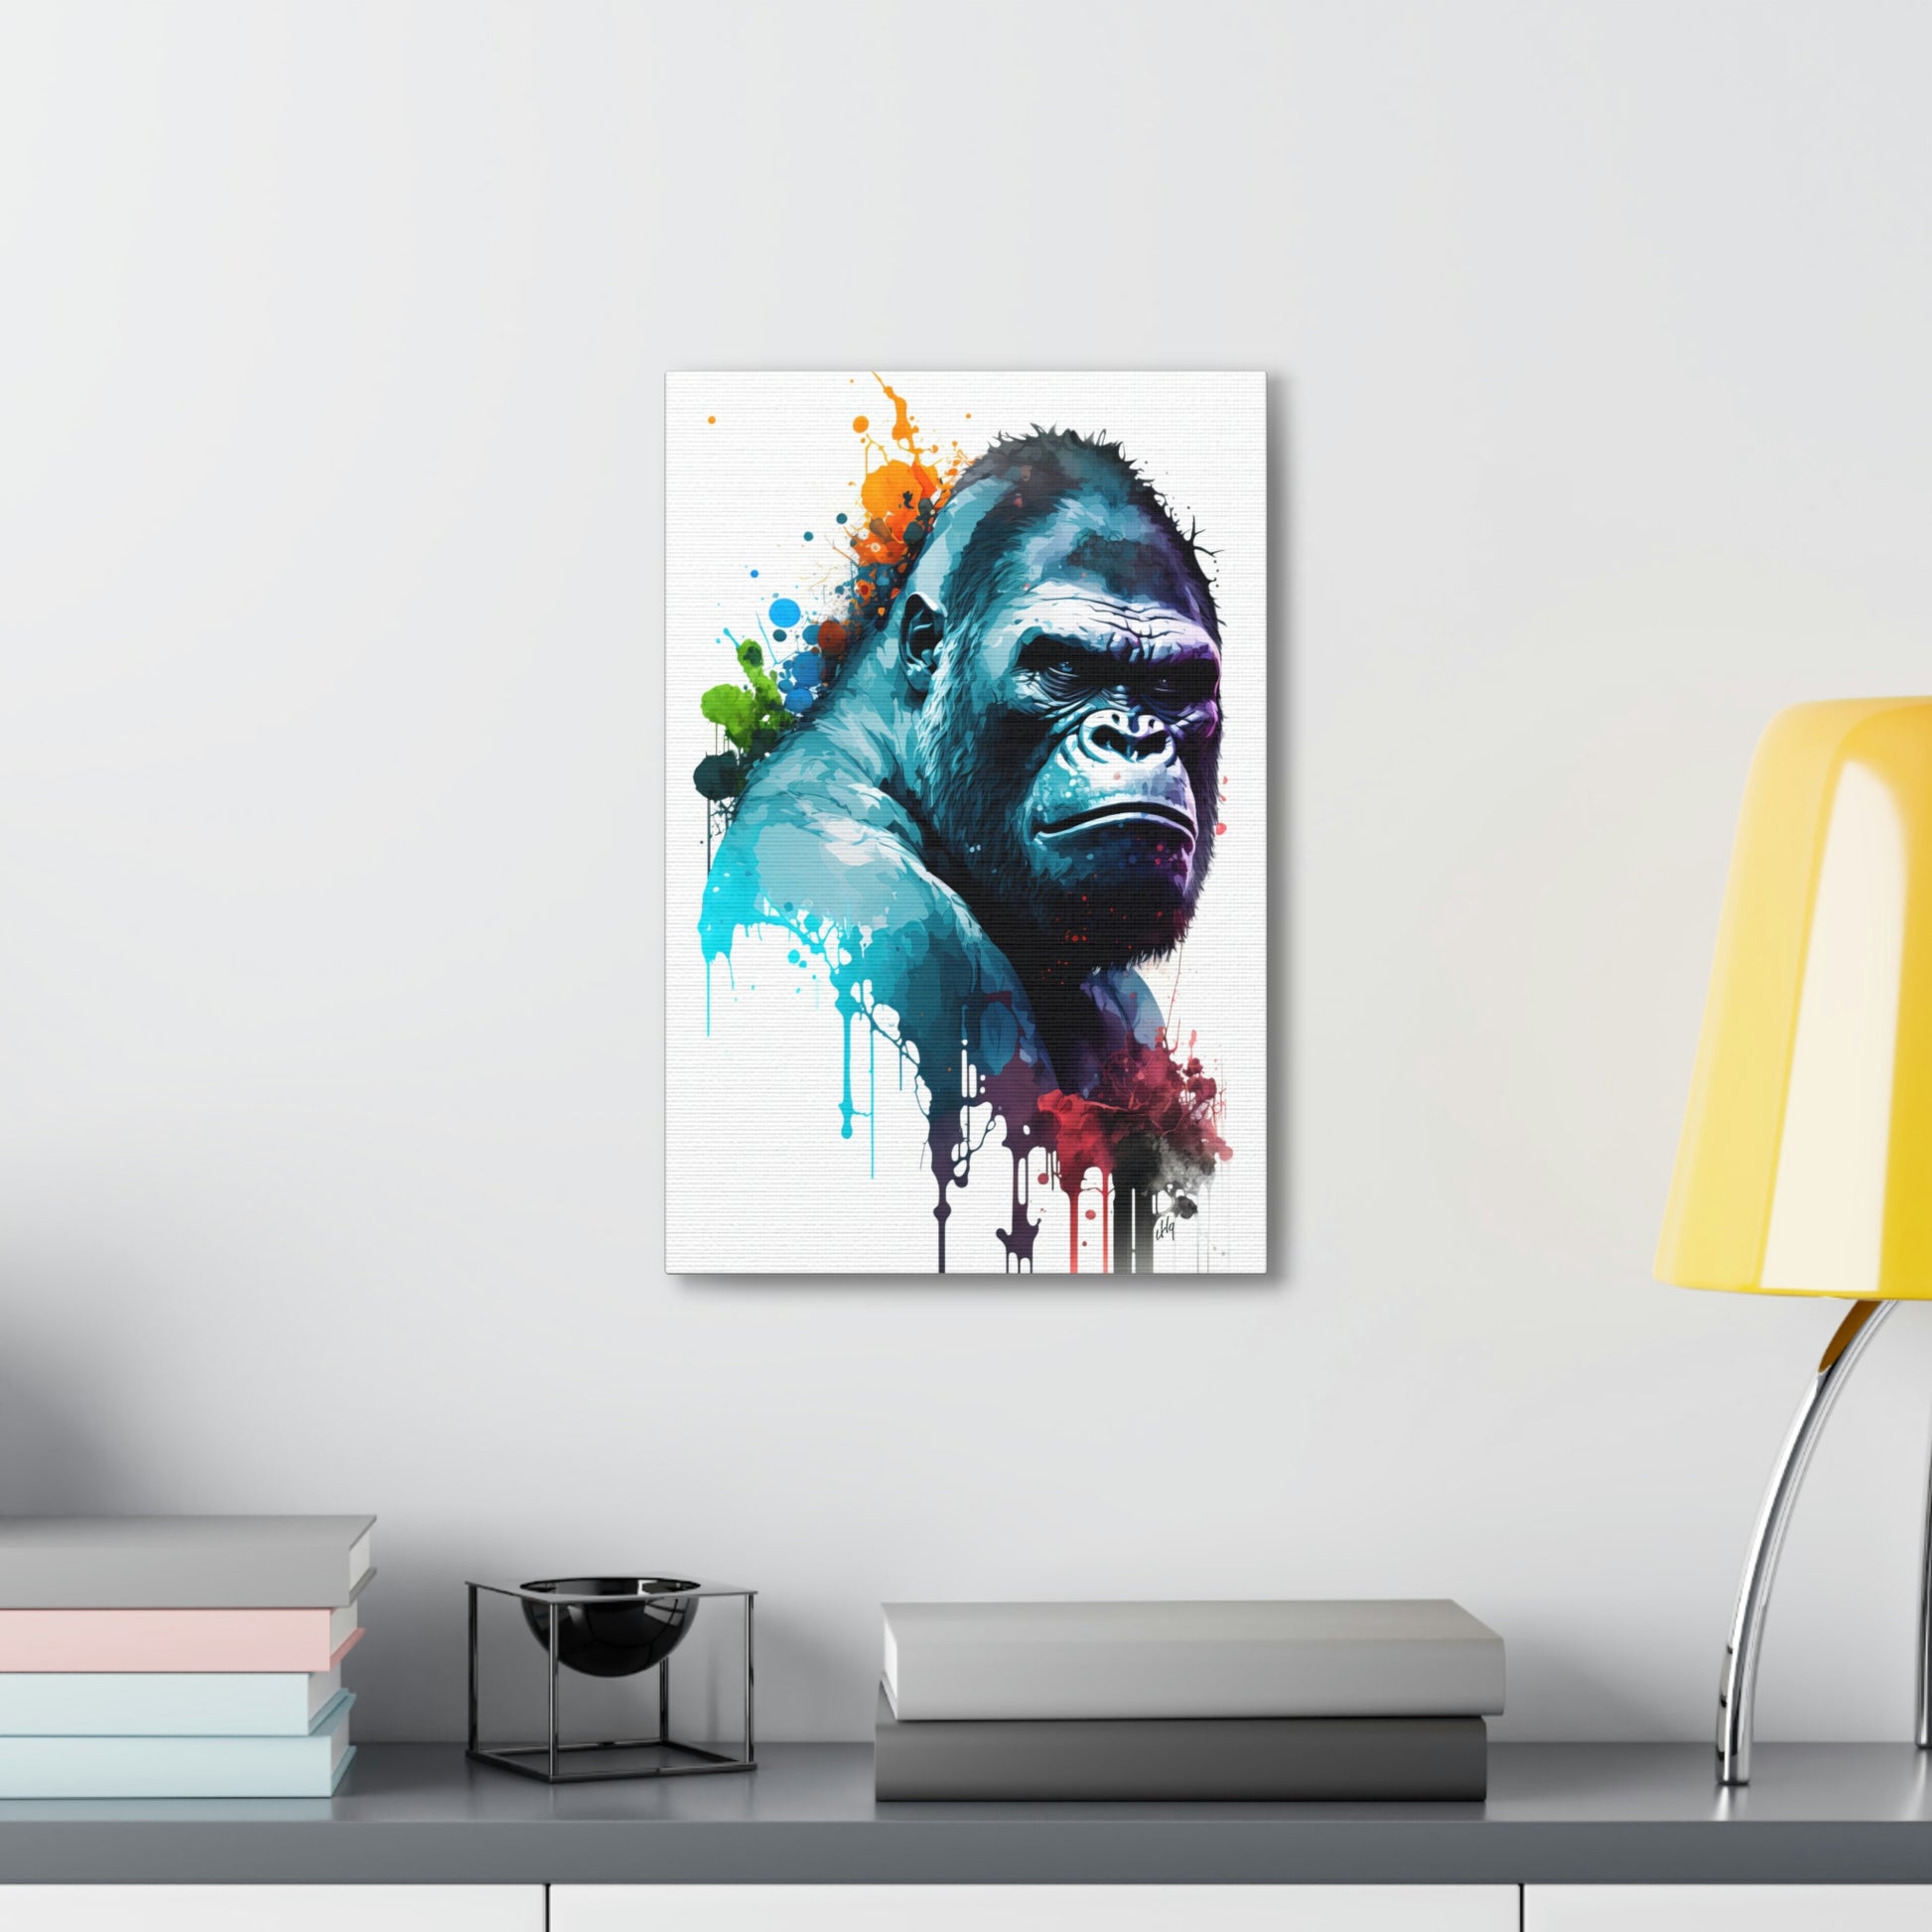 Gorilla Wall Art from the Wildlife Collection, a captivating depiction on canvas, showcasing the powerful presence and depth of this magnificent primate. A must-have for modern wall art aficionados, nature-inspired gallery displays, bold canvas masterpieces, and contemporary art decor enthusiasts.